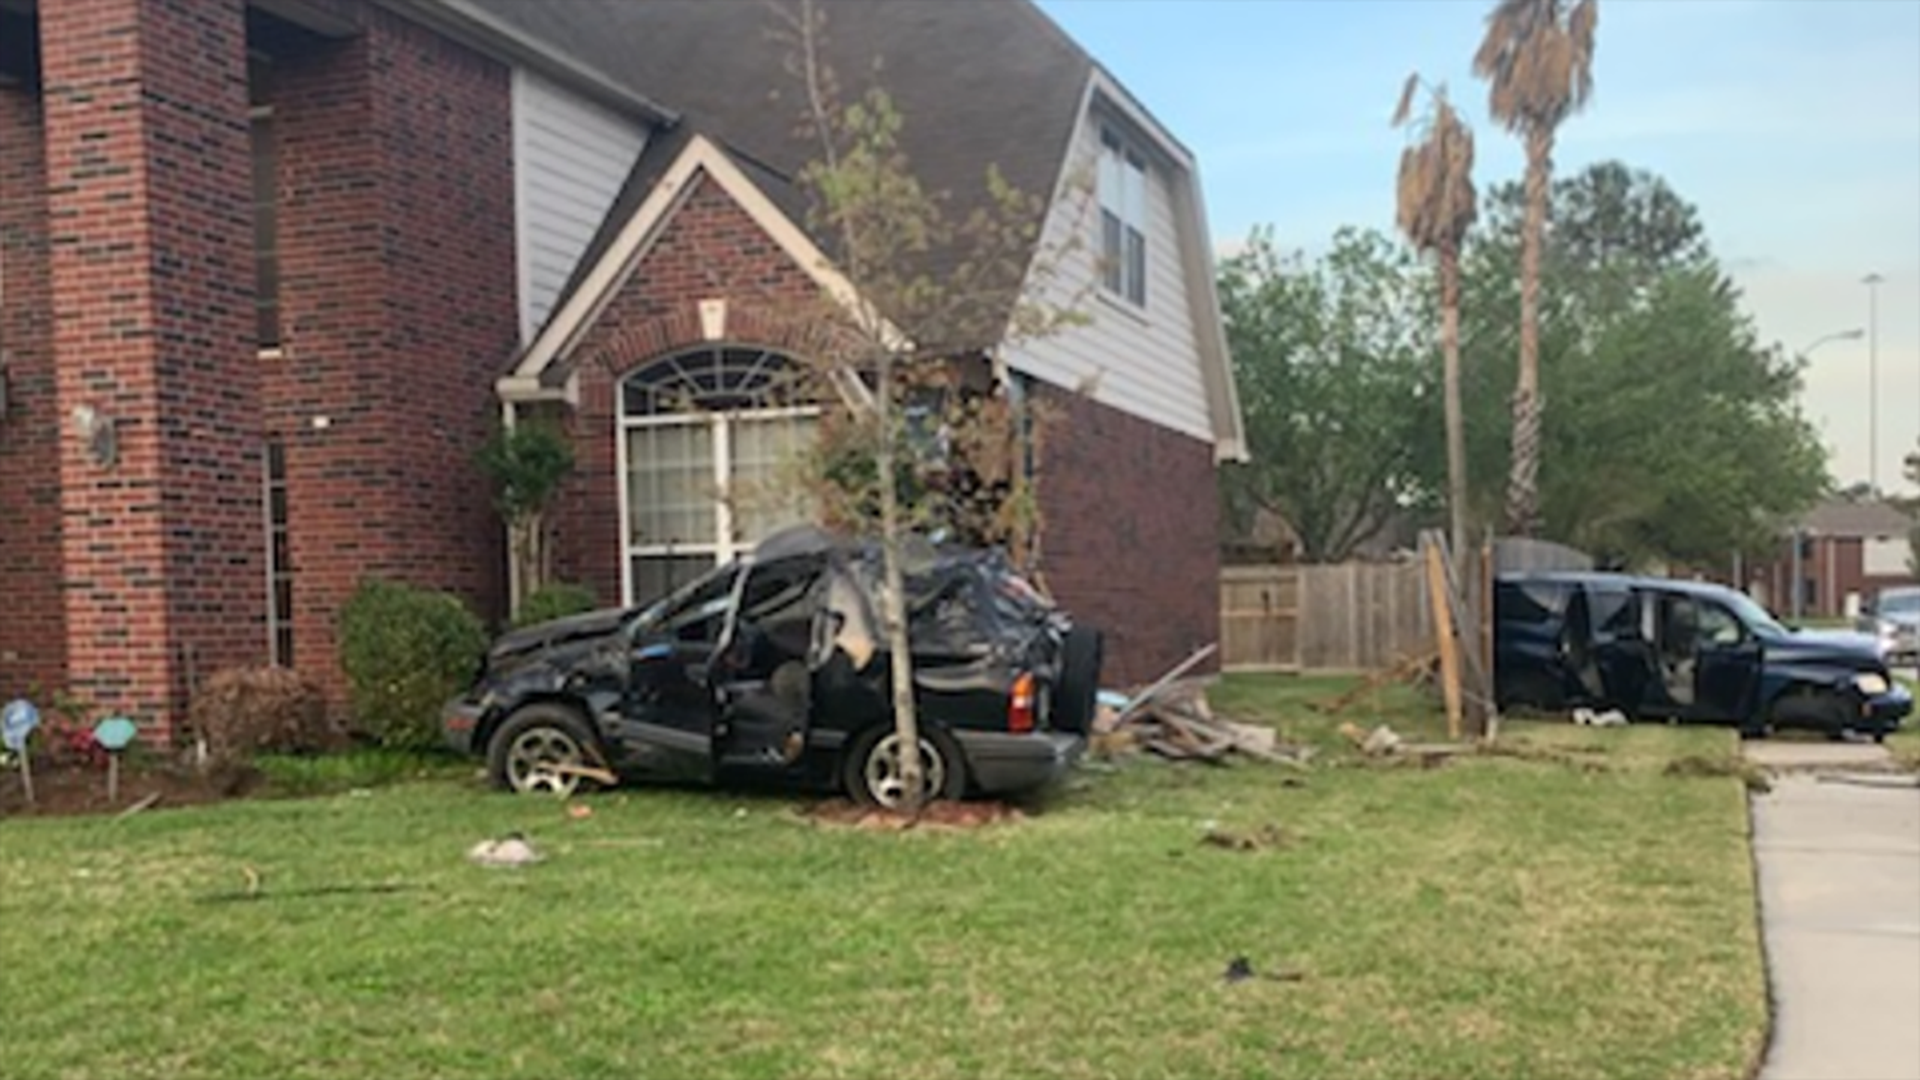 Pct. 4 Constable Mark Herman said two vehicles were involved in a road rage chase in Spring when one of the drivers lost control and crashed into a house.